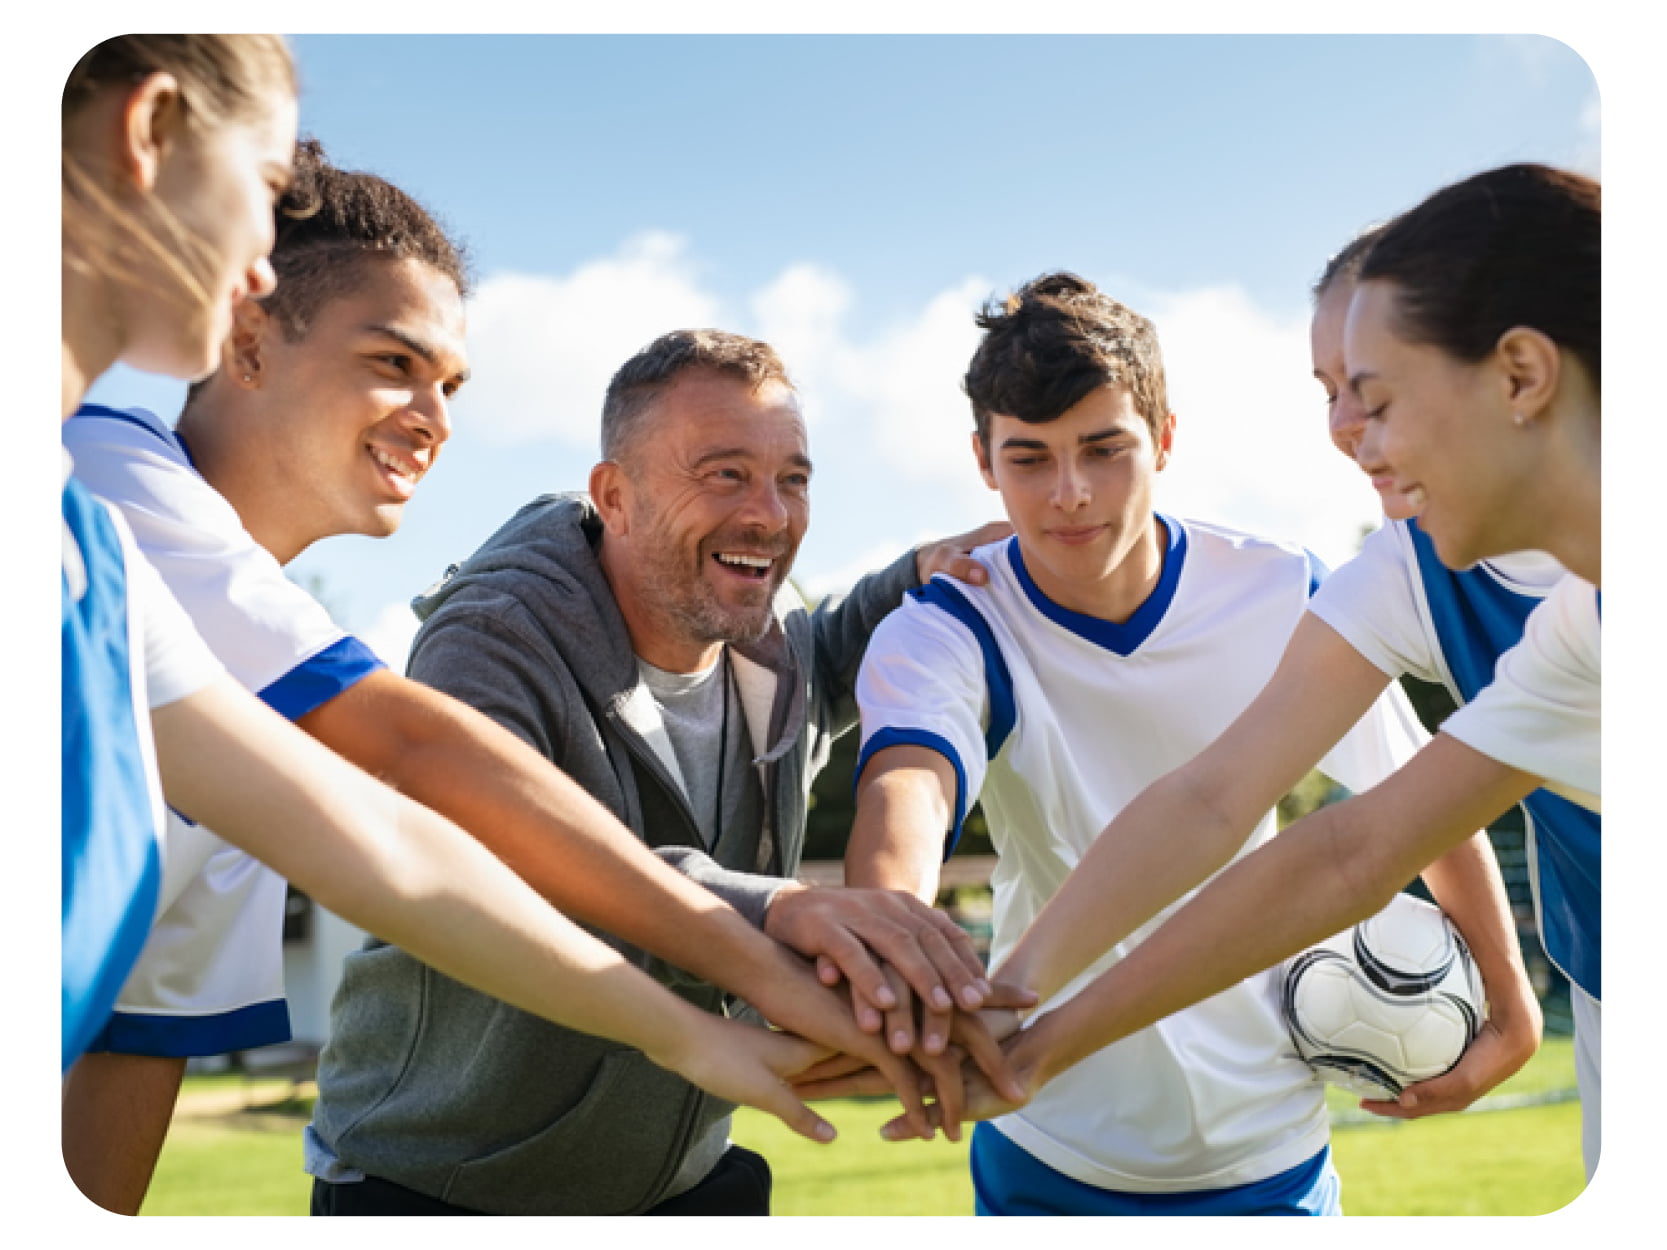 insurance for sports coaches